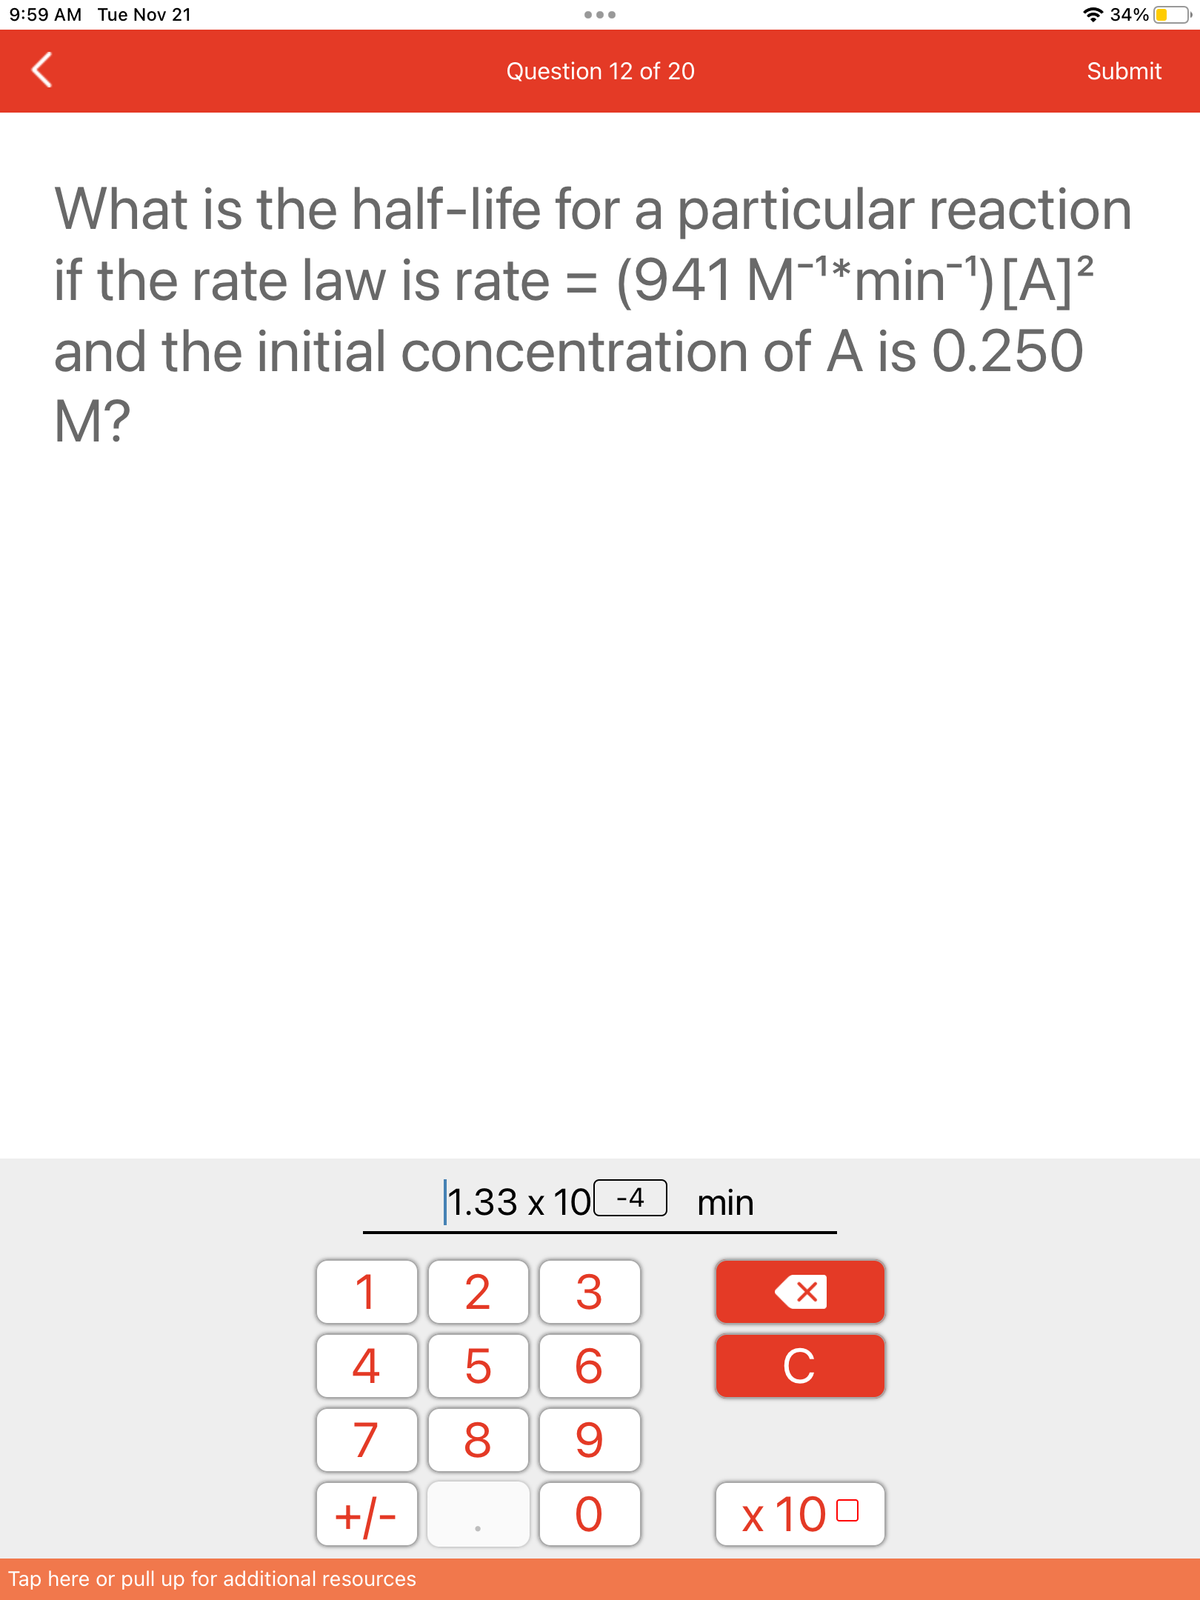 9:59 AM Tue Nov 21
1
4
7
+/-
Tap here or pull up for additional resources
Question 12 of 20
What is the half-life for a particular reaction
if the rate law is rate= (941 M-¹*min-¹) [A]²
and the initial concentration of A is 0.250
M?
1.33 x 10-4 min
3
6
9
25
8
O
X
C
34%
x 100
Submit